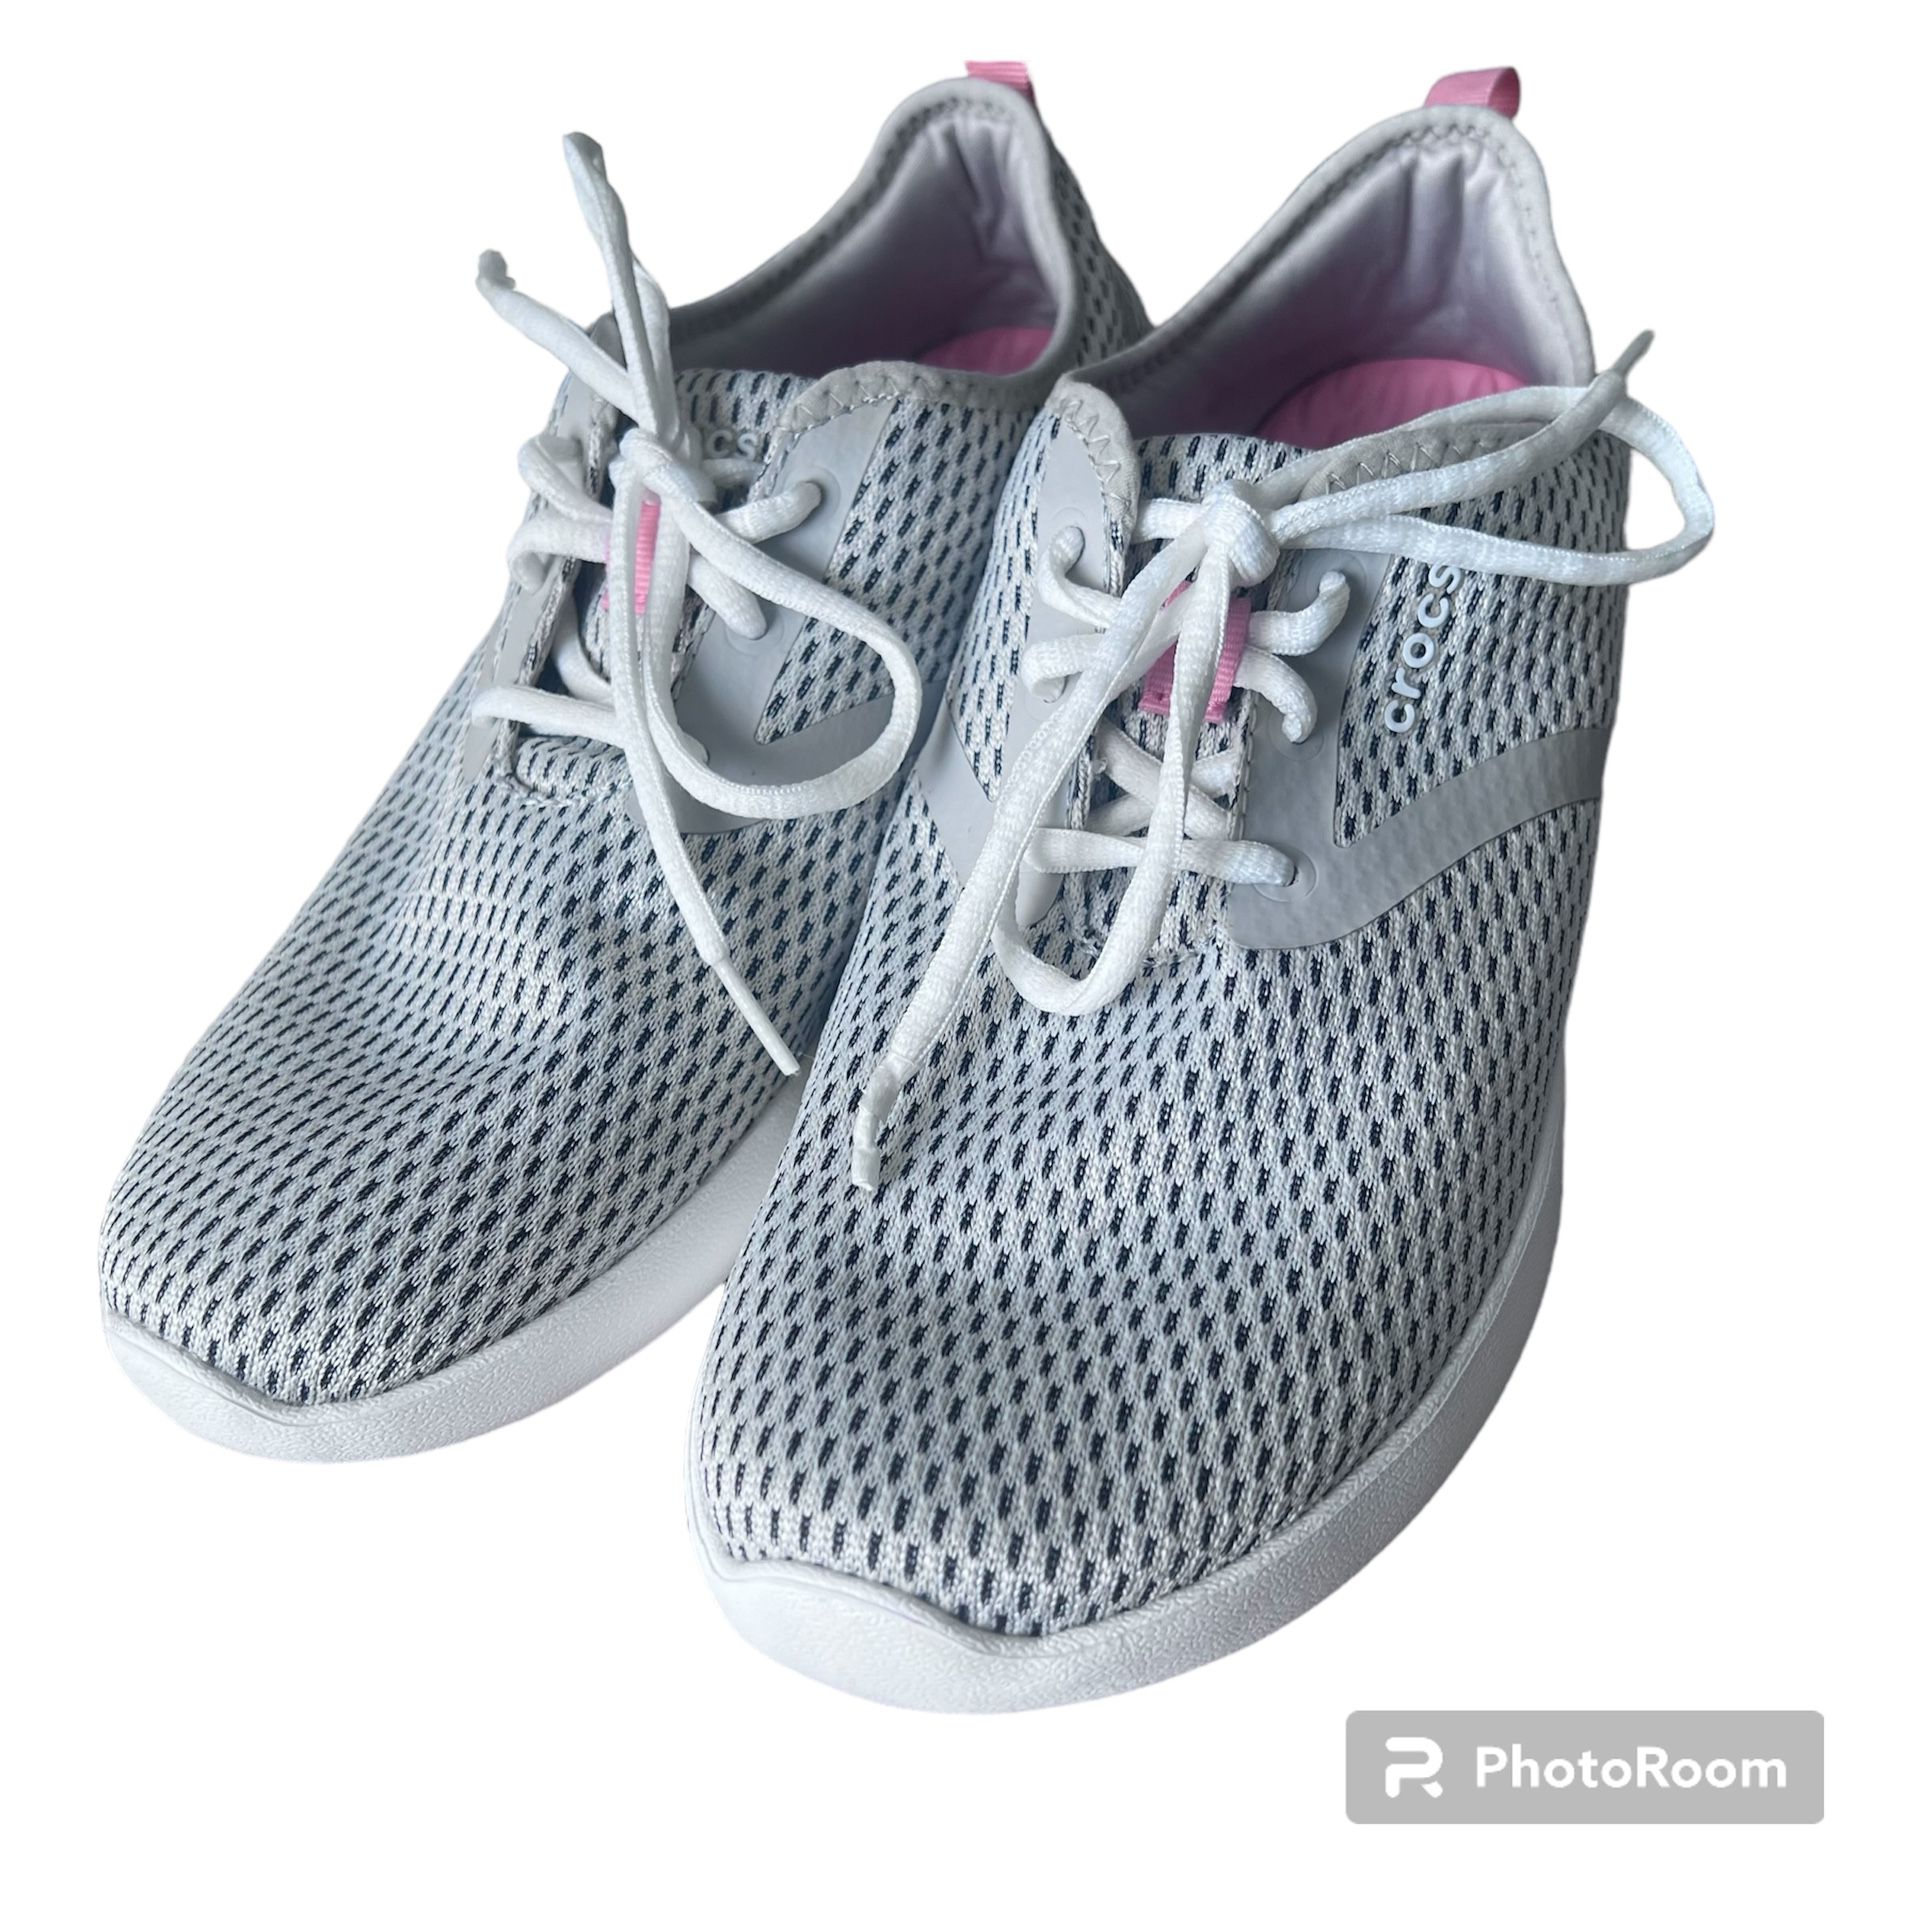 Crocs Womens Literide Mesh Lace-up Sneakers Grey/White Pink Size 10